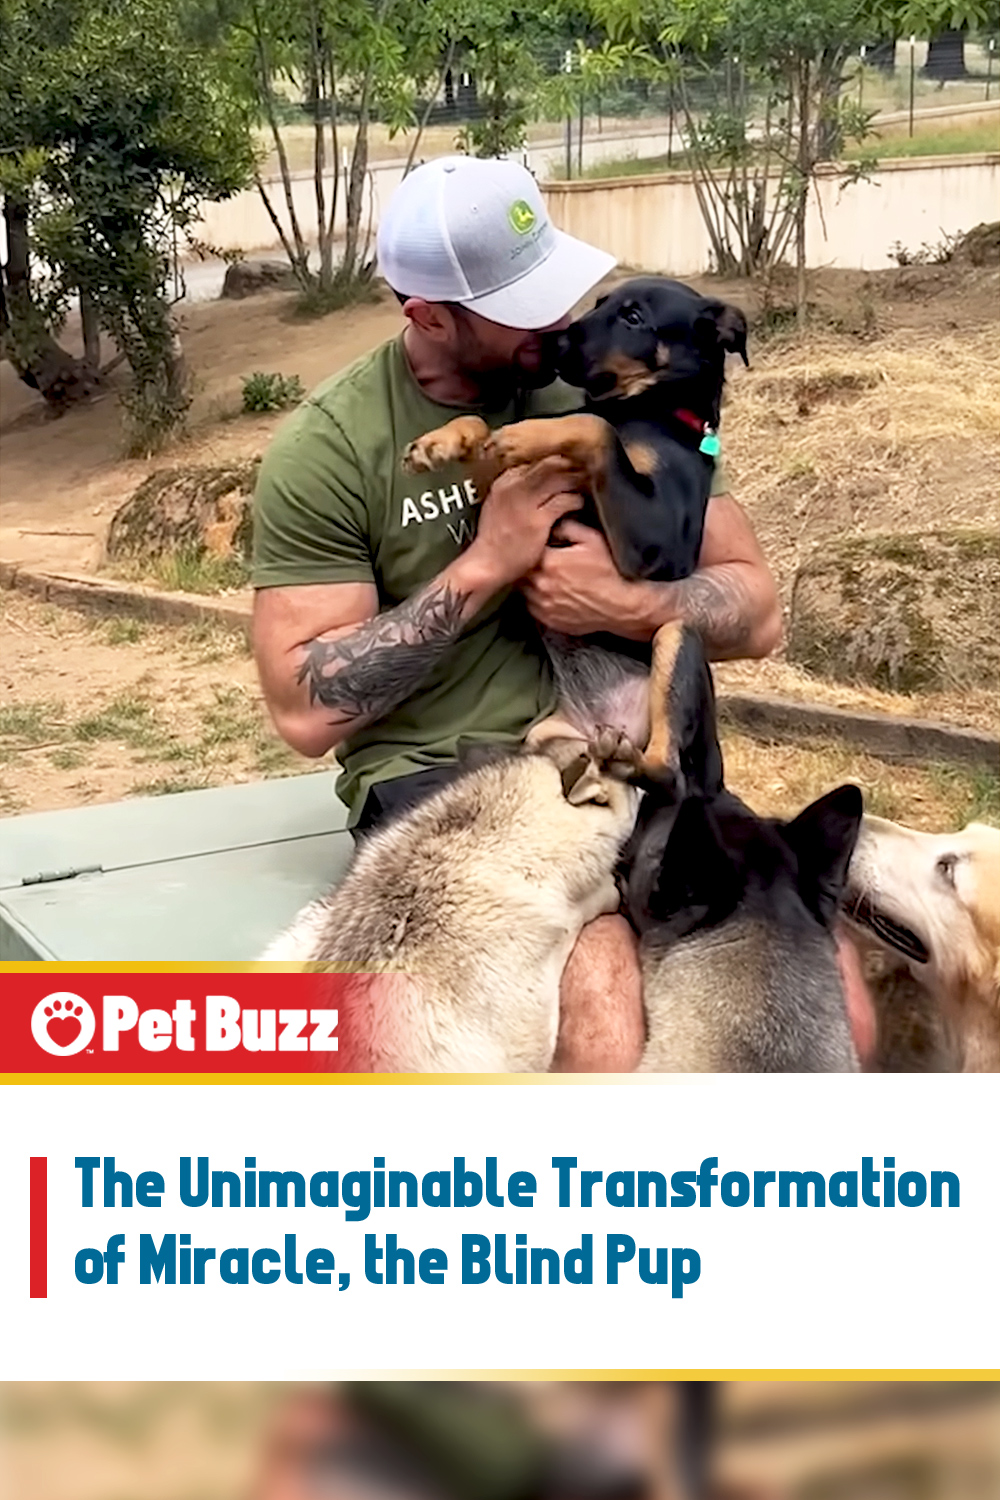 The Unimaginable Transformation of Miracle, the Blind Pup